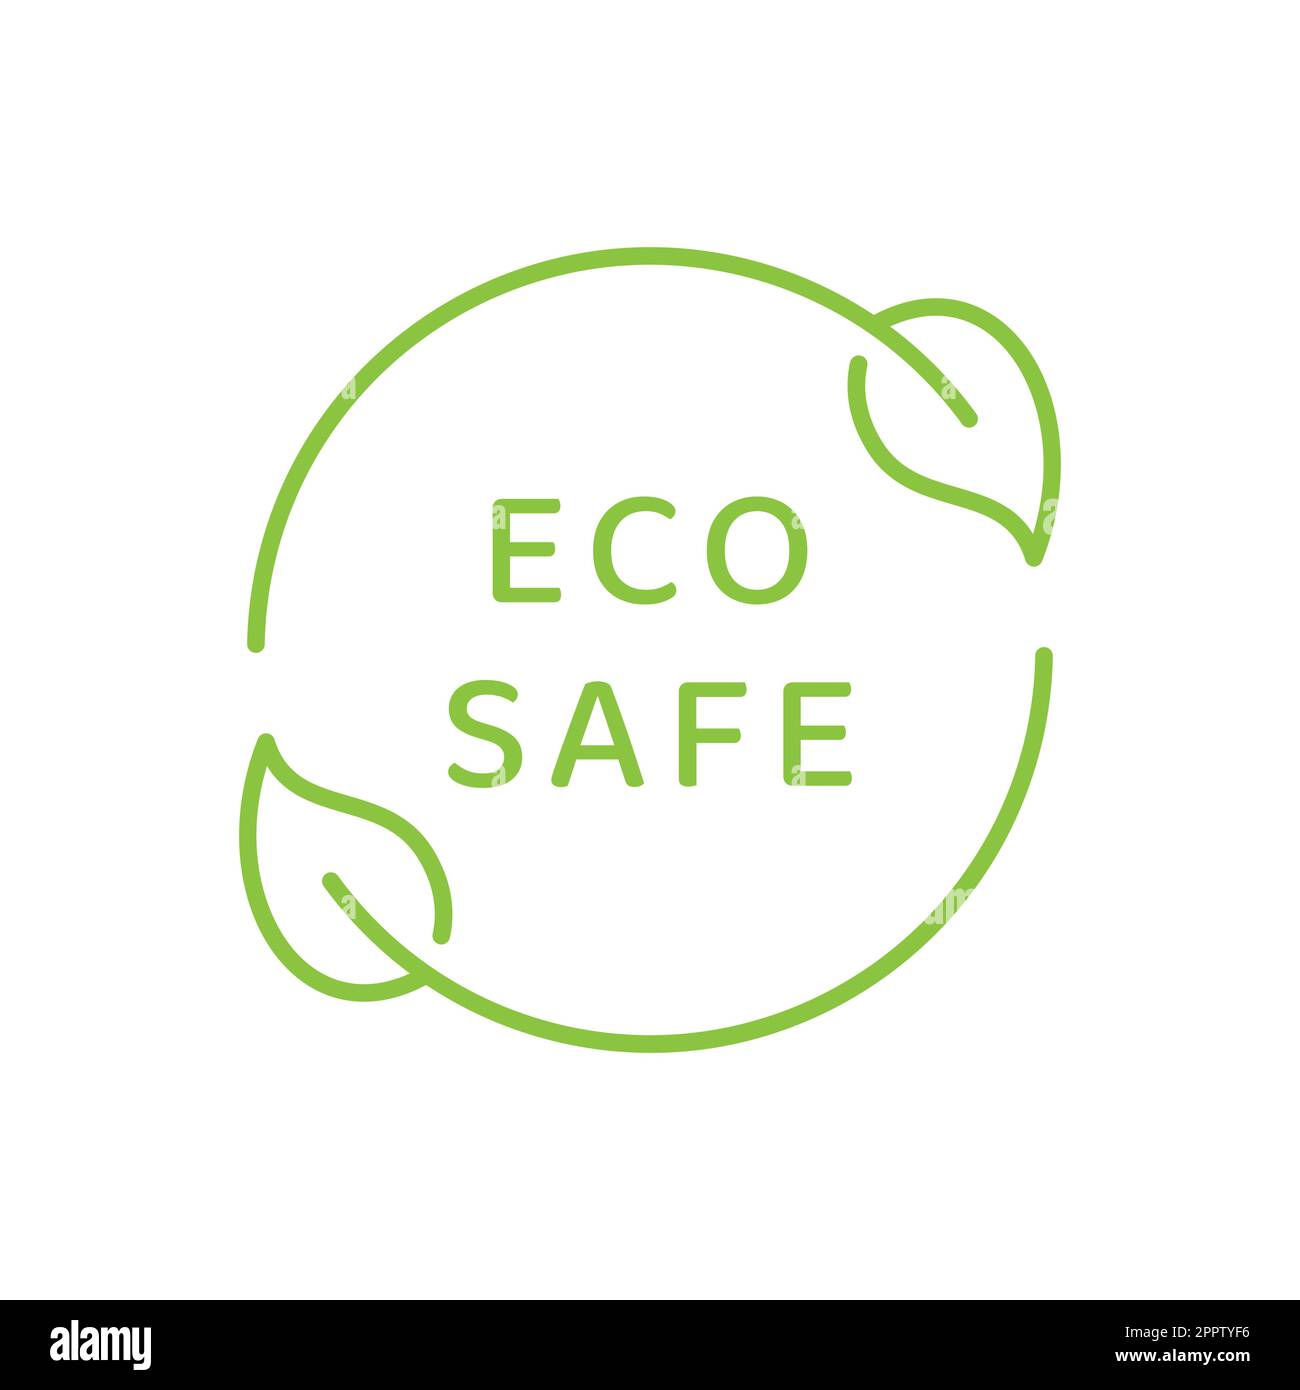 Eco safe vector label Stock Vector